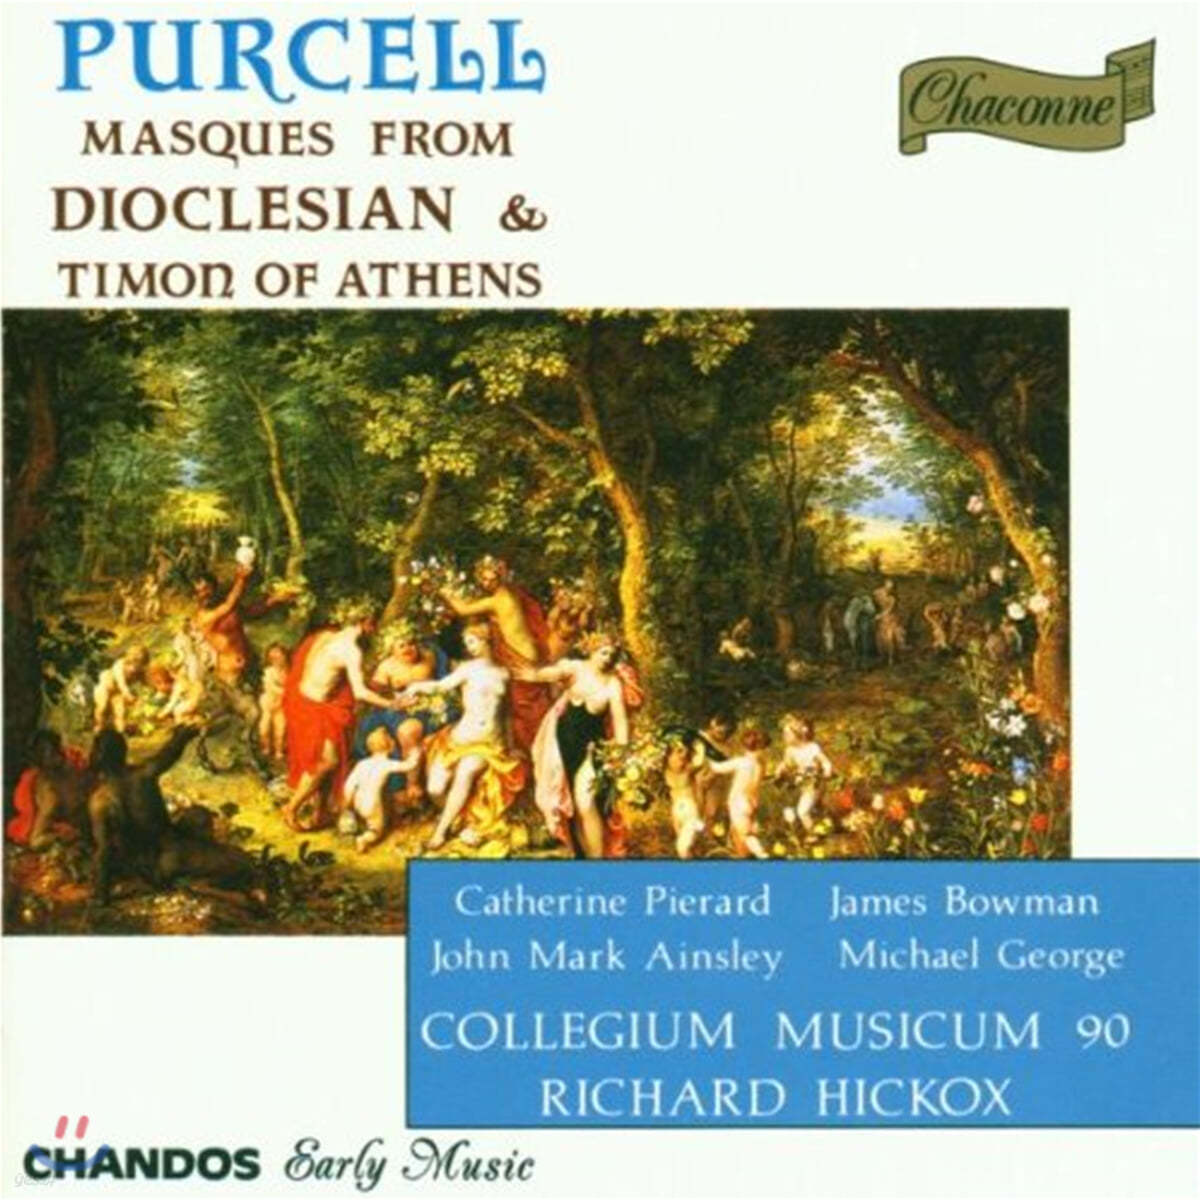 Richard Hickox 퍼셀: 아테네의 티몬, 디오클레시안 (Purcell: Masques From Dioclesian, Timon of Athens)